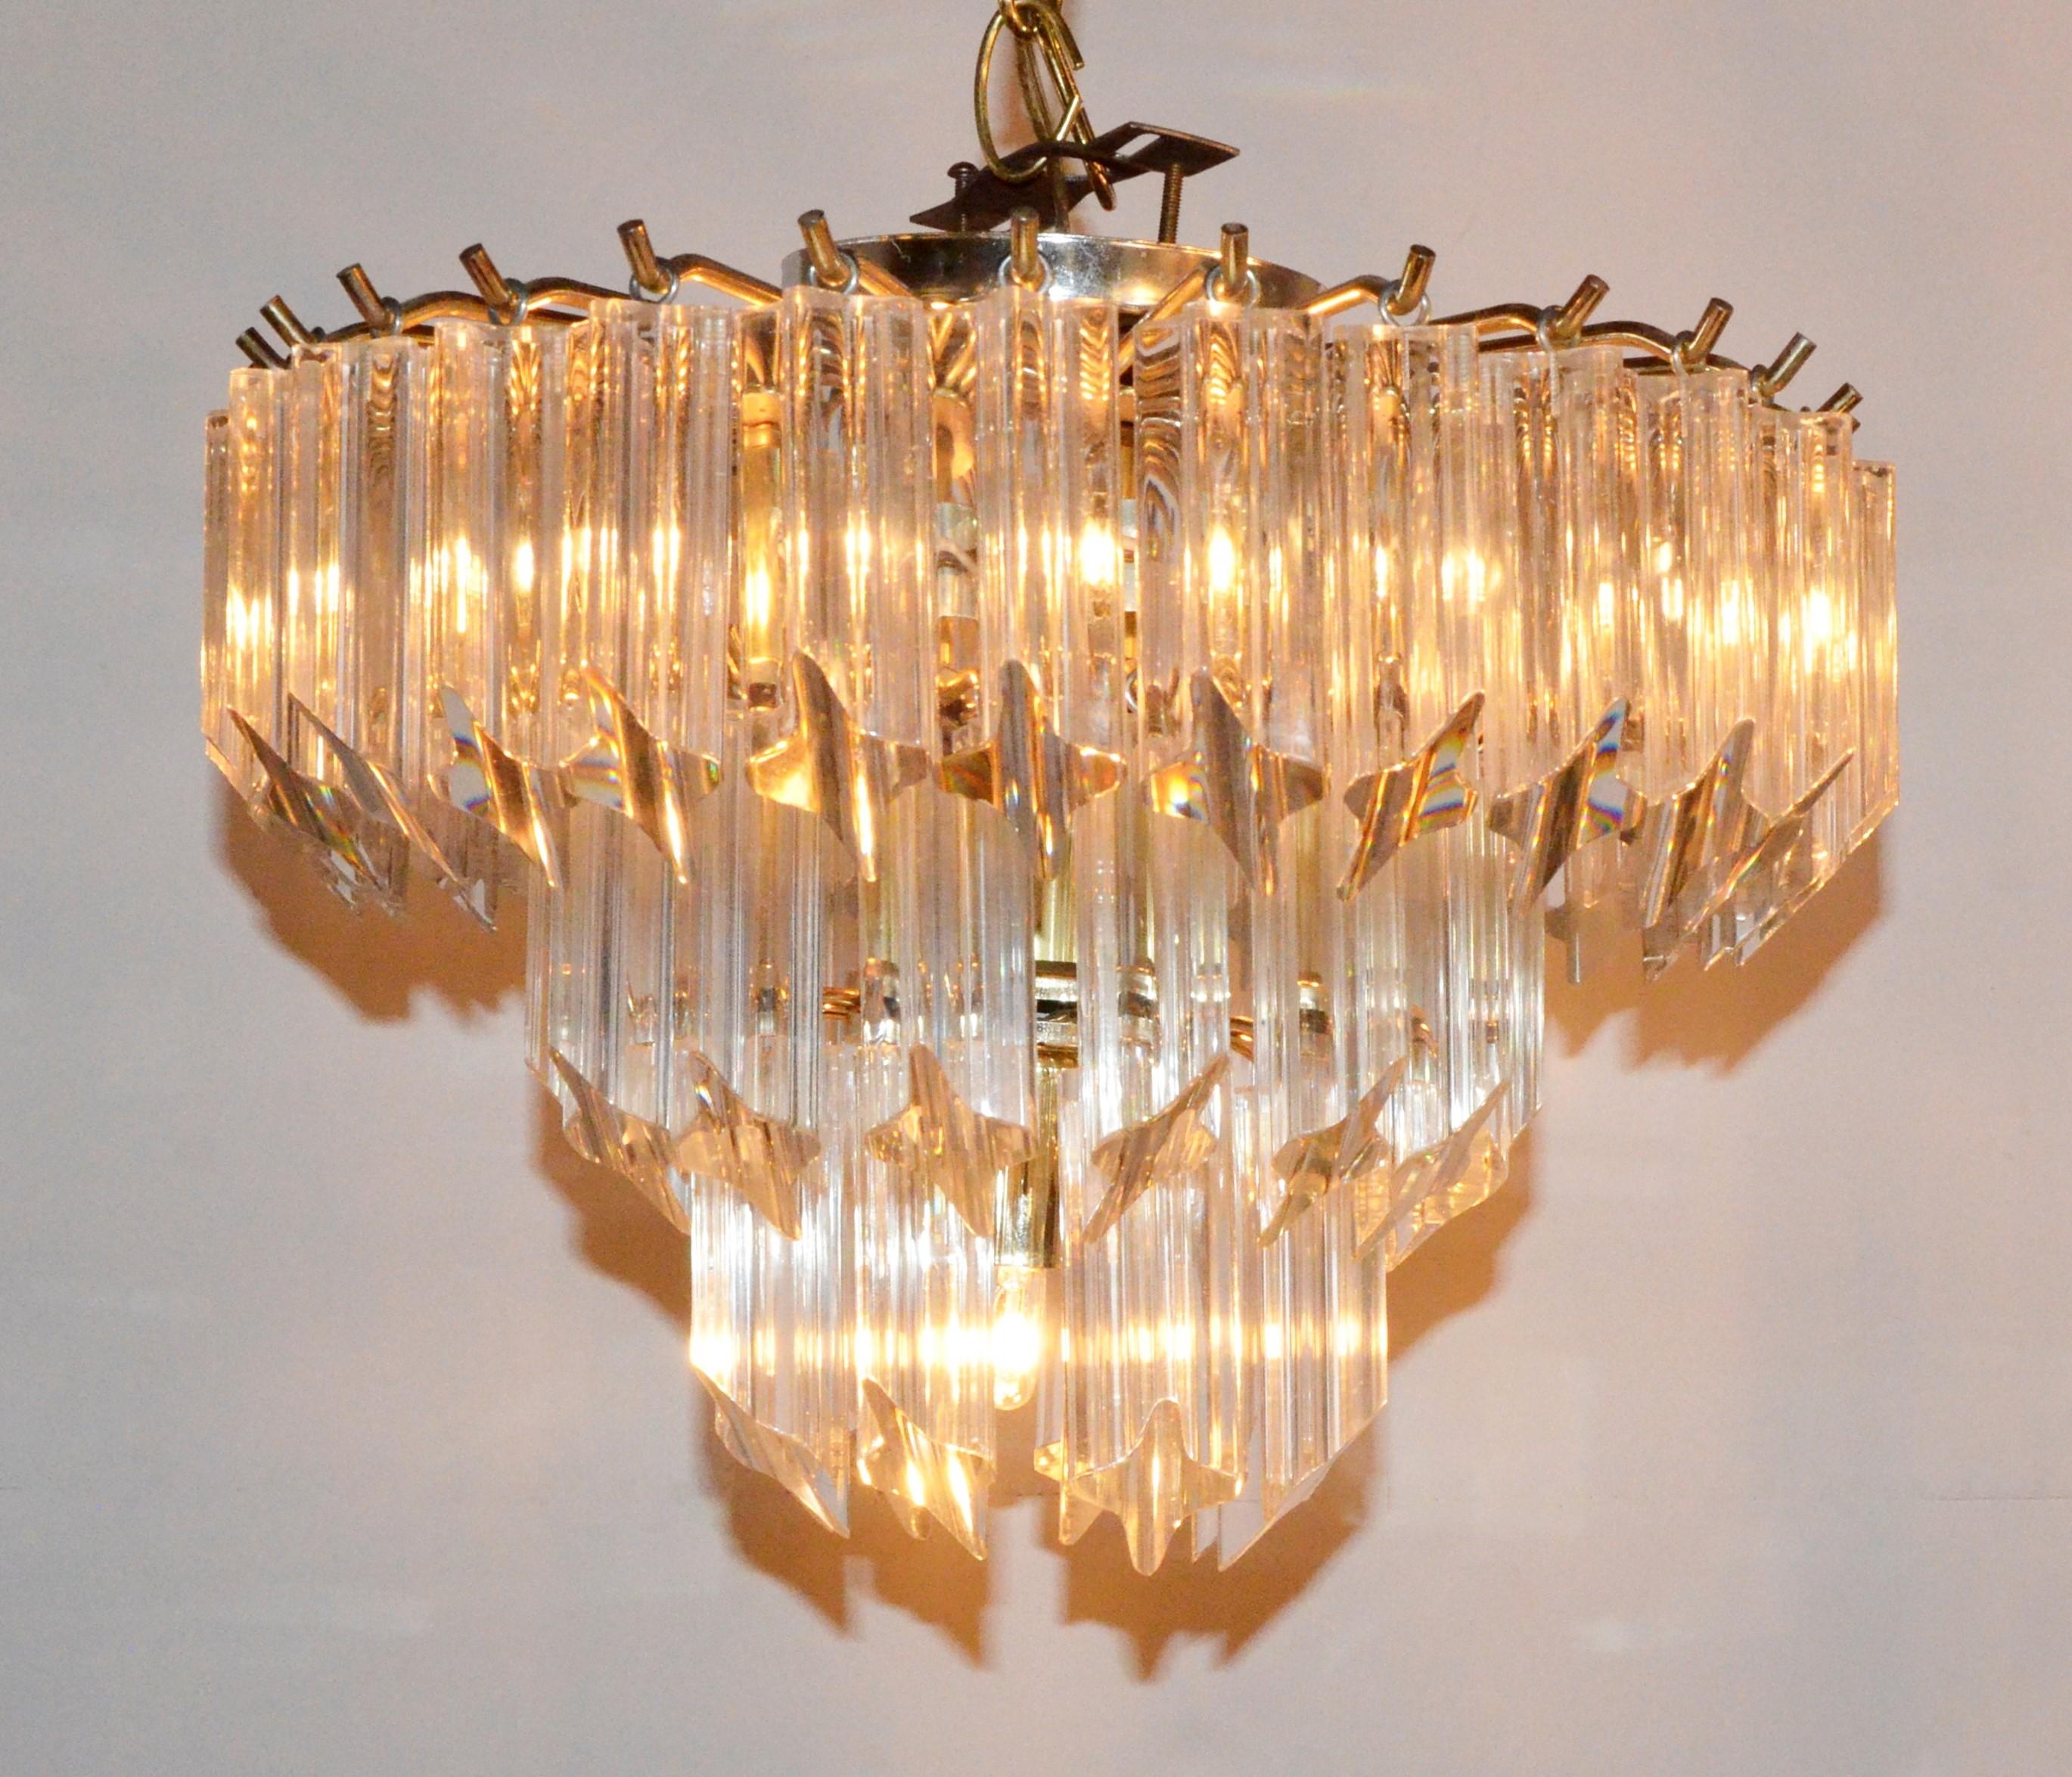 Lucite Hanging Triad Prisms with Brass Frame Venini Style Flushmount Chandelier For Sale 6